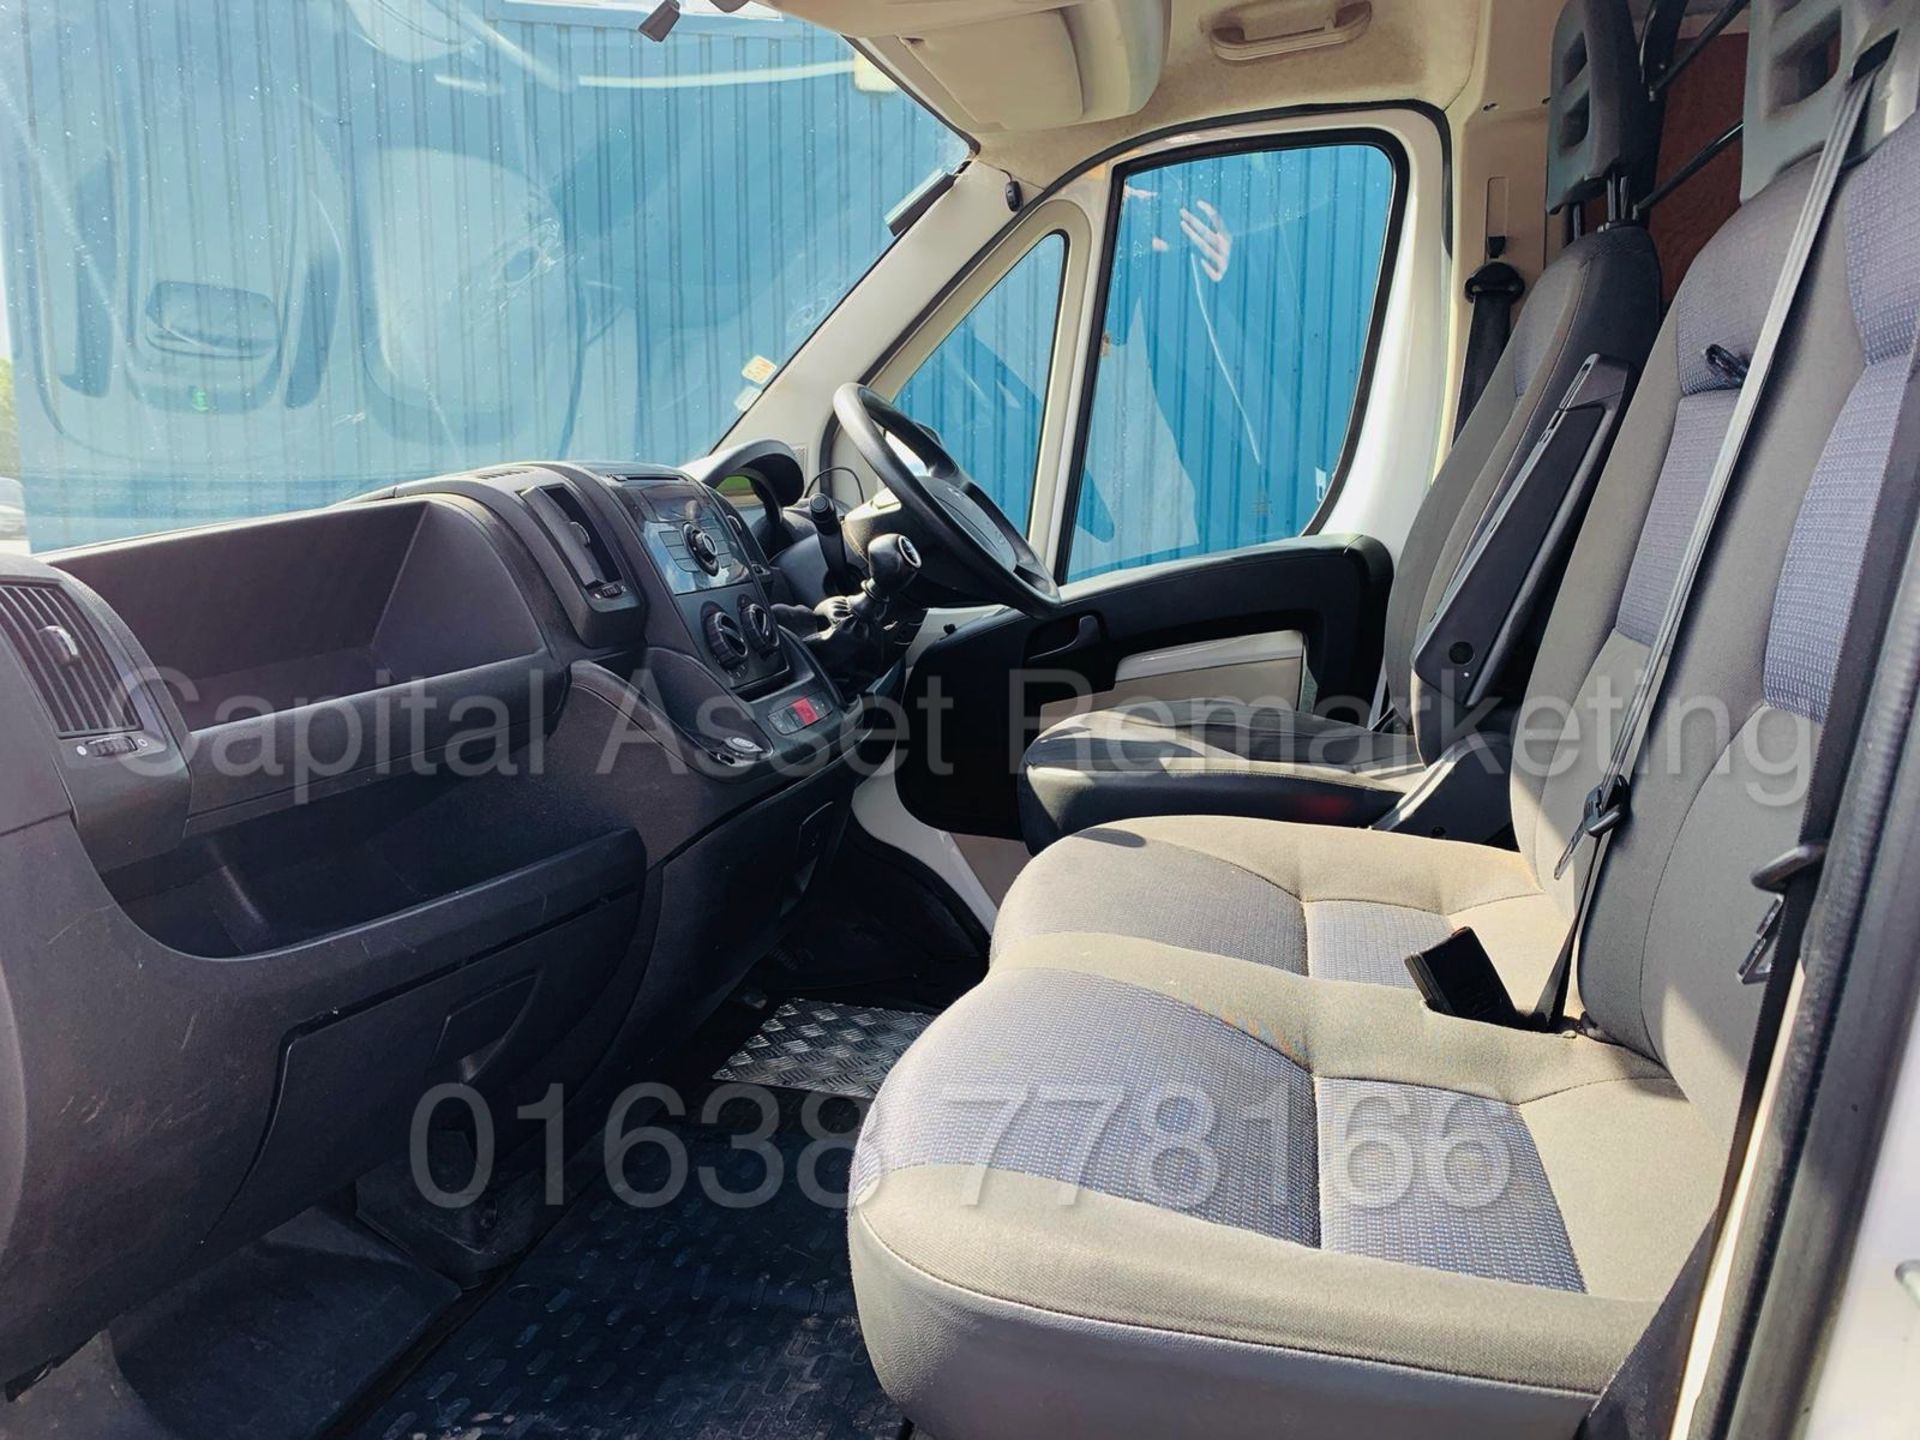 CITROEN RELAY 'L4 EXTRA LWB HI-ROOF' (2012) '2.2 HDI - 130 BHP - 6 SPEED' **LOW MILES** - Image 11 of 21